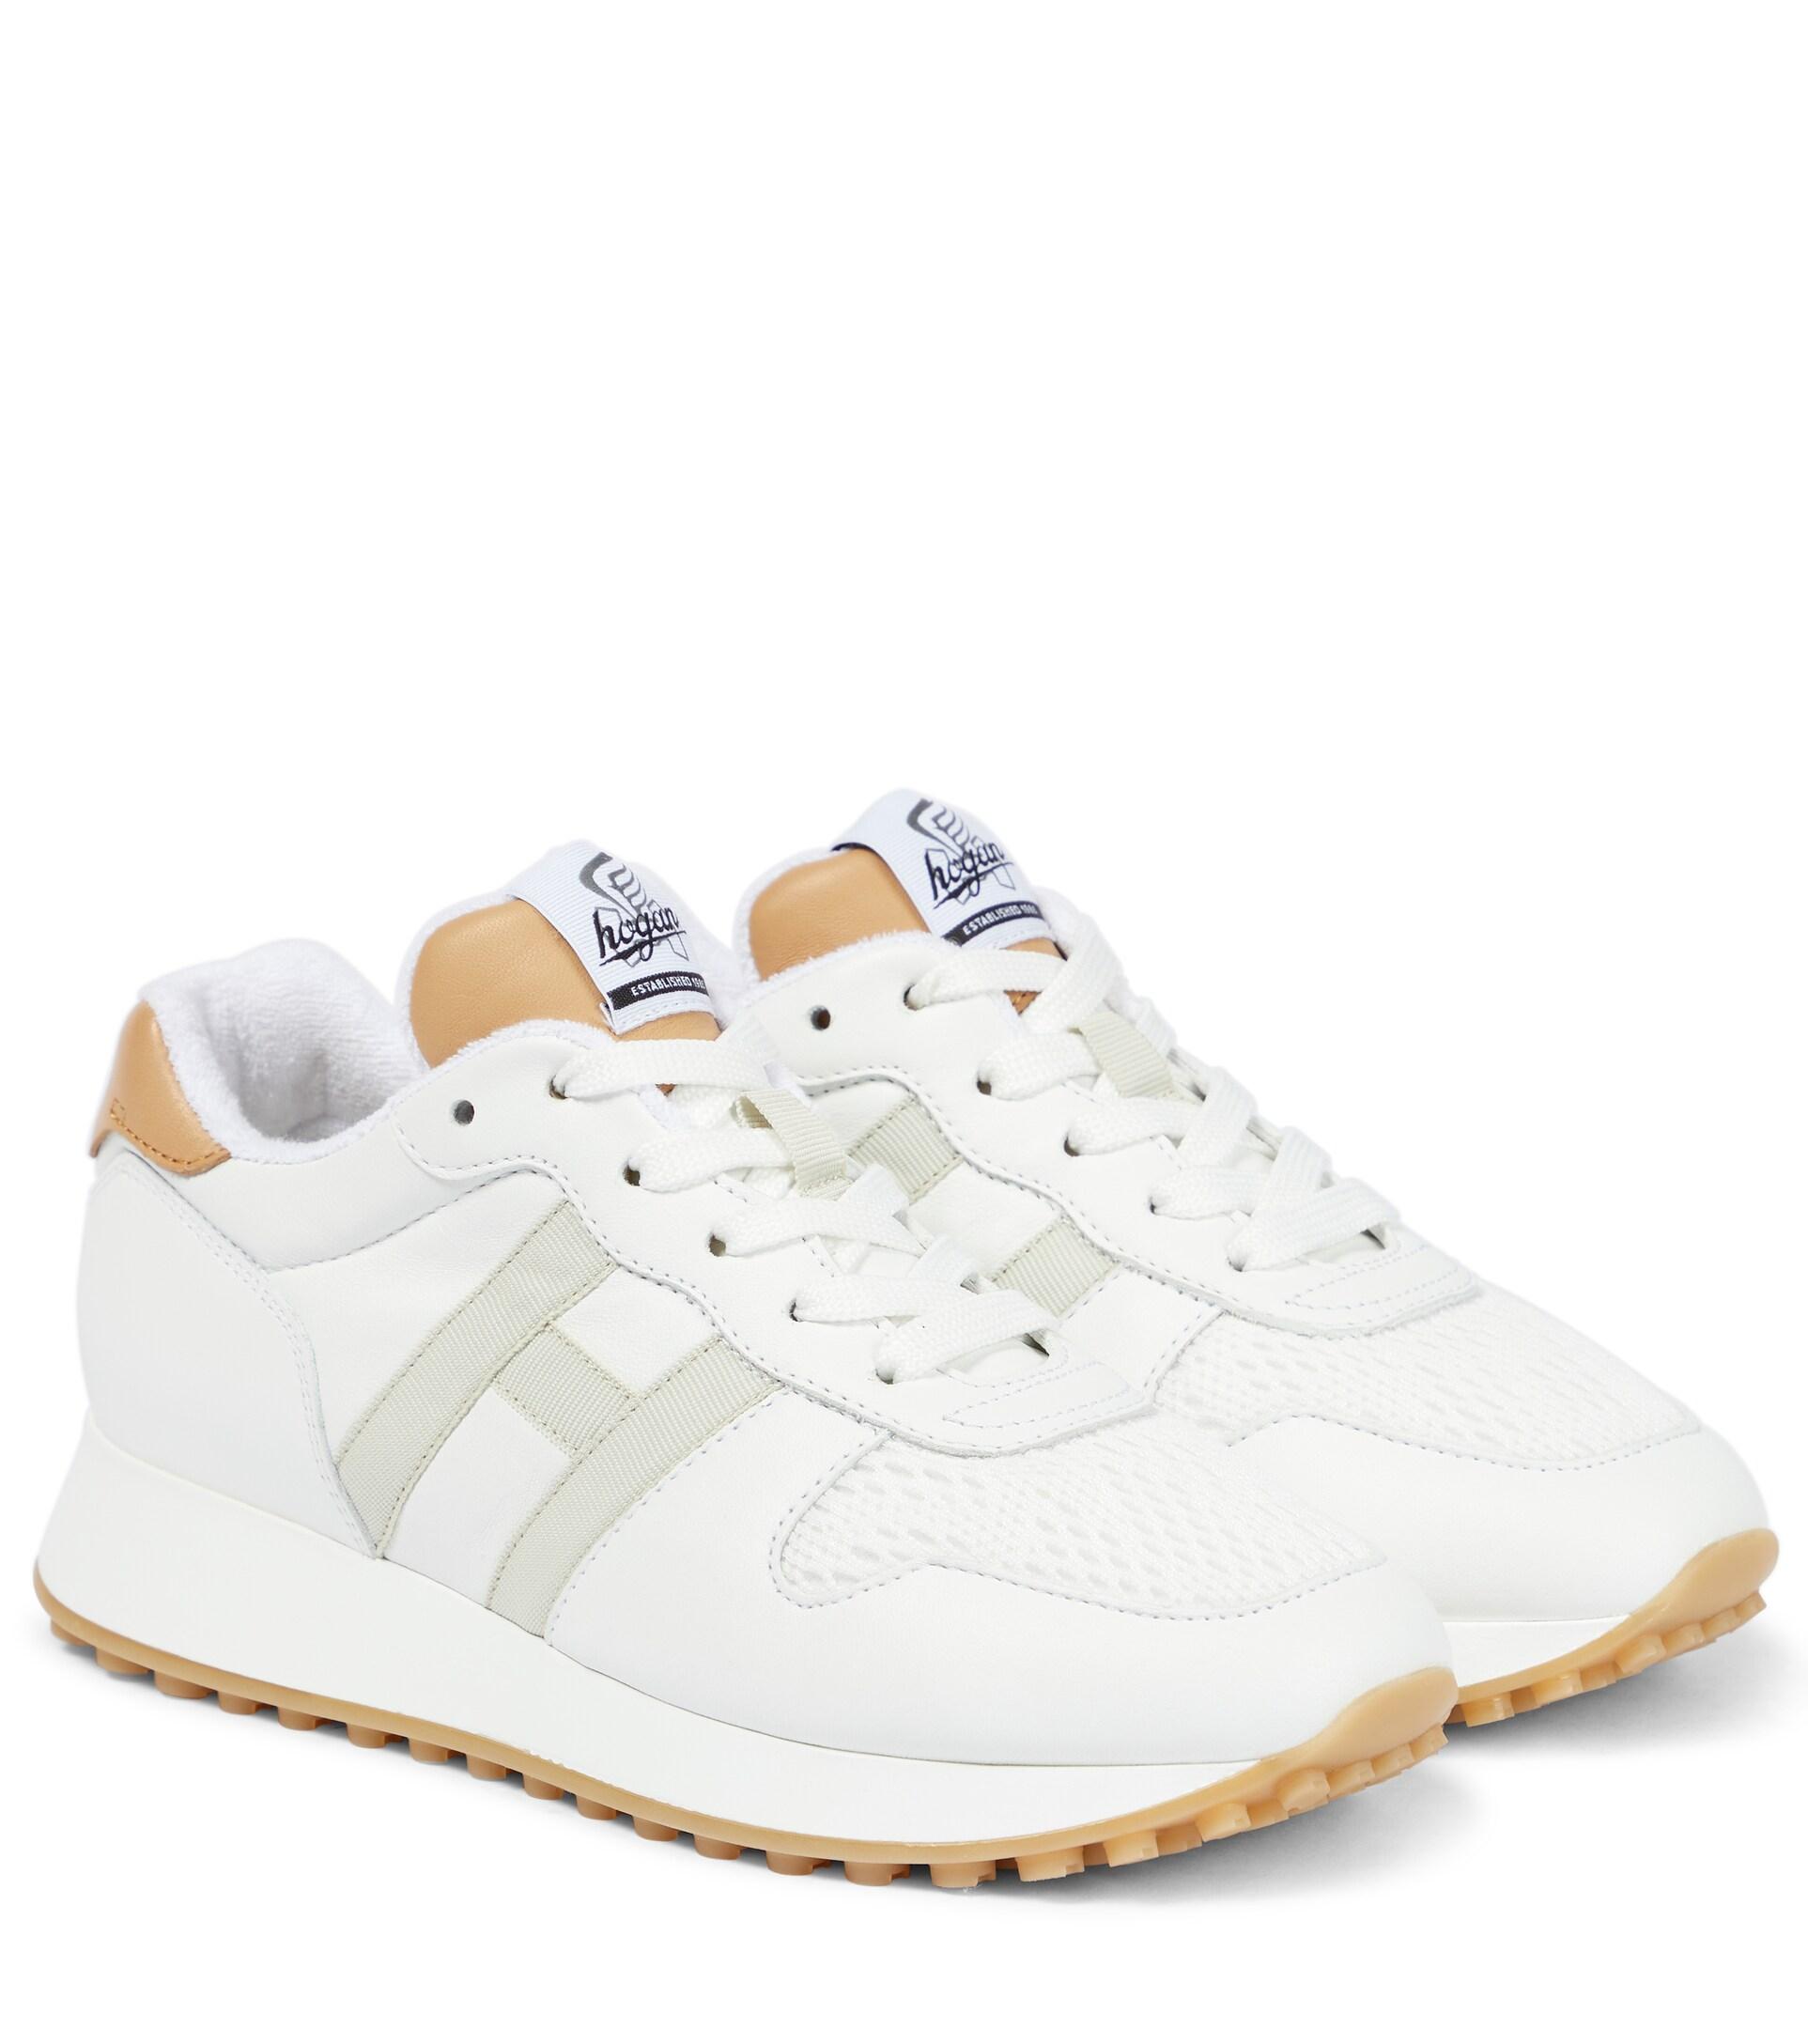 Hogan H429 Leather Sneakers in White | Lyst